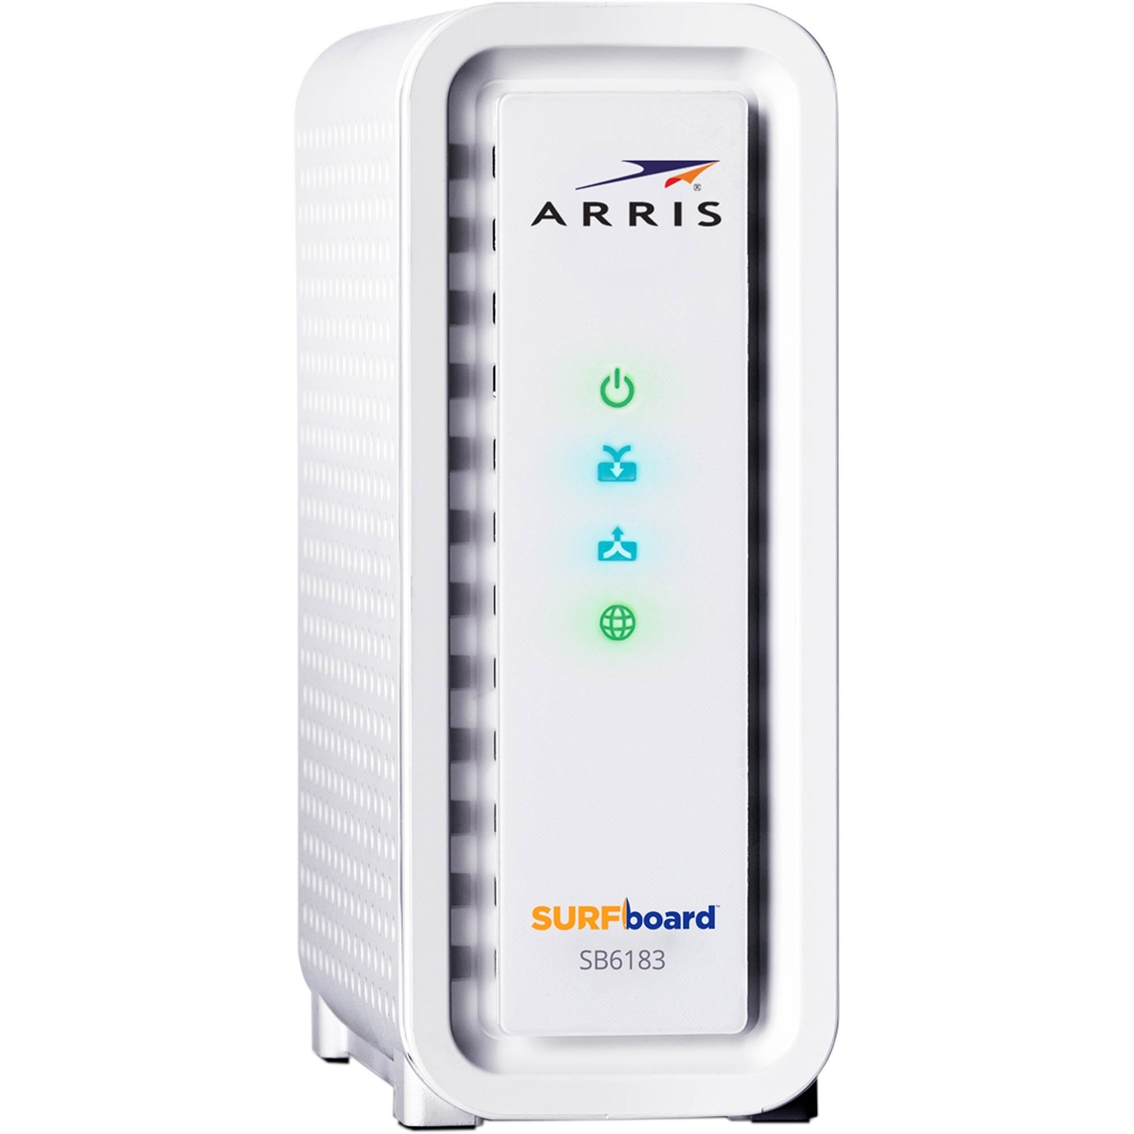 ARRIS SURFboard SB6183 Cable Modem, White - Image 2 of 4